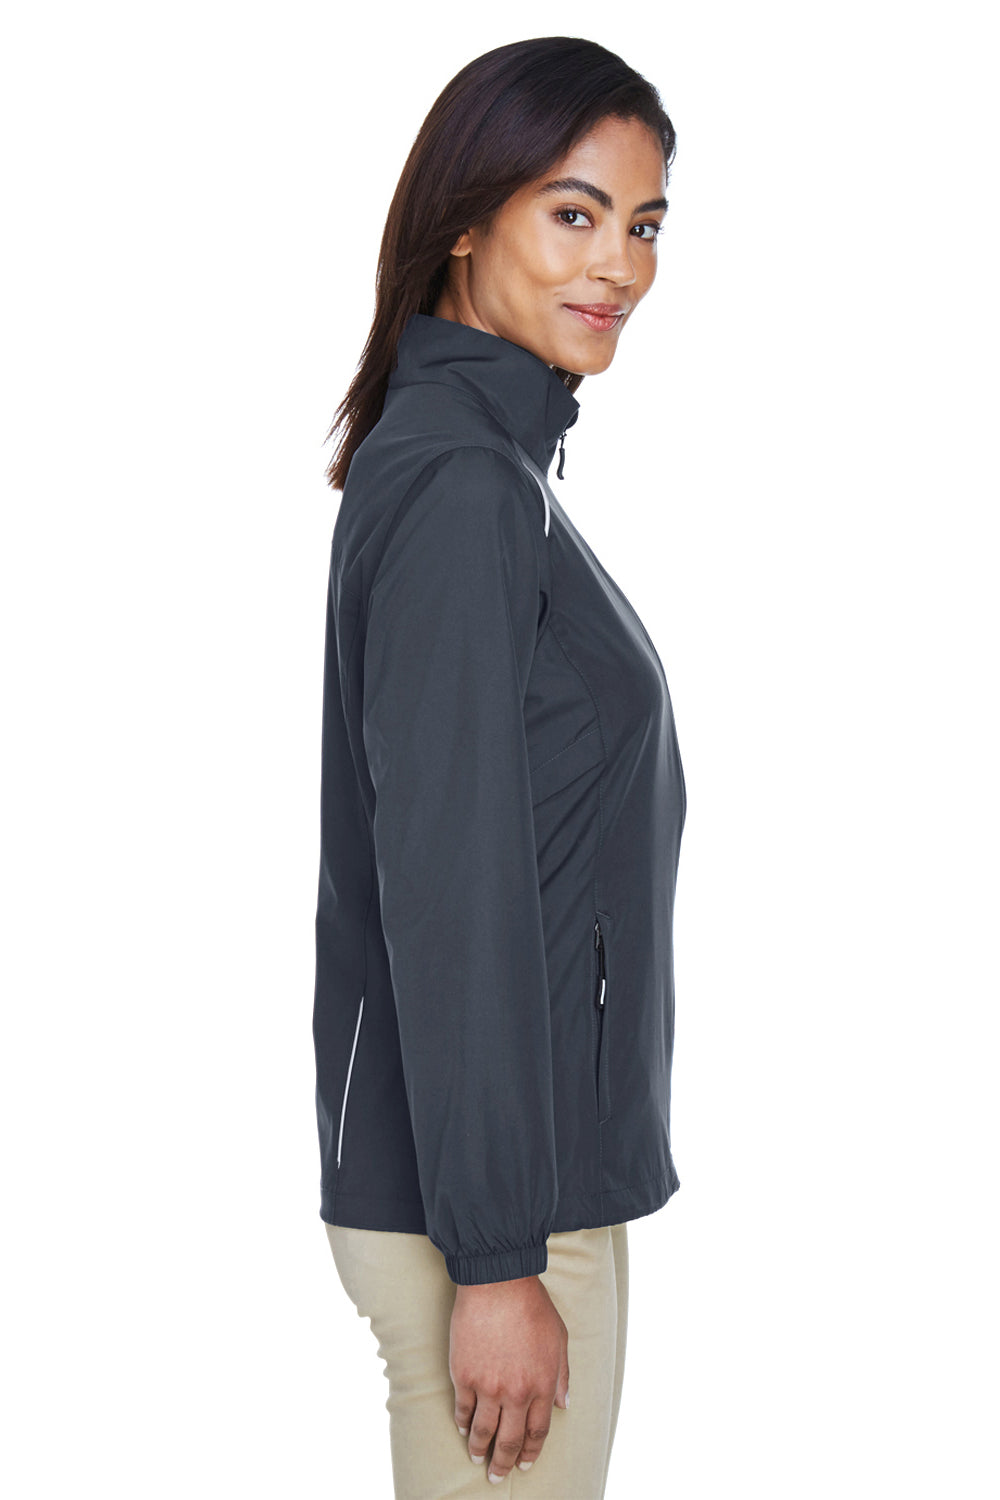 Core 365 78183 Womens Motivate Water Resistant Full Zip Jacket Carbon Grey Side